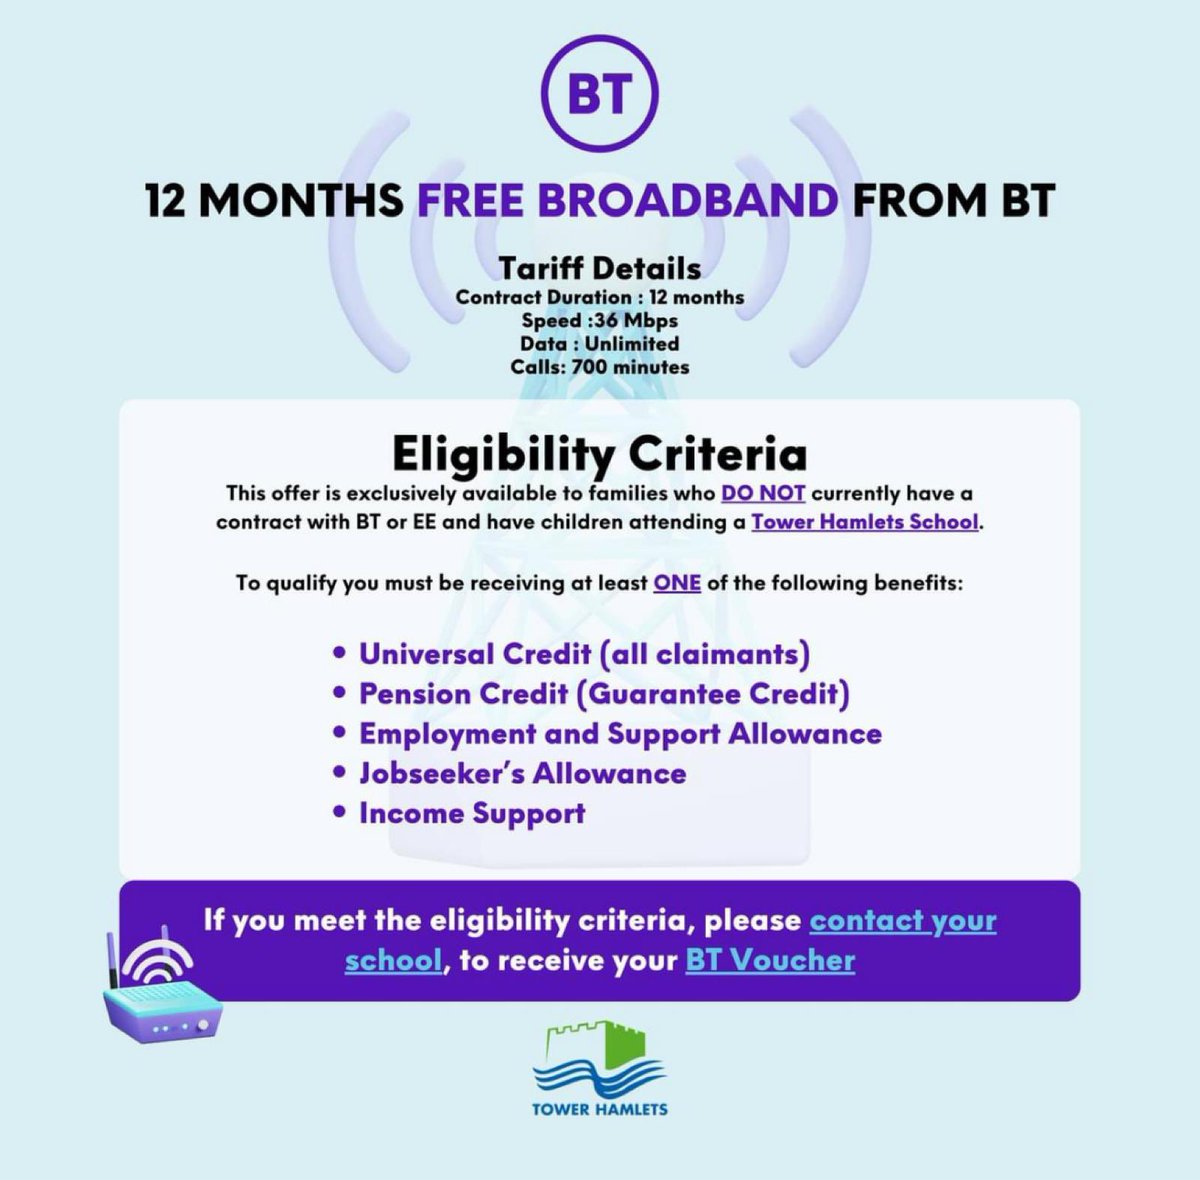 🛜 Great news for #TowerHamlets parents with school-aged children - BT is offering 12 months of free broadband! 🛜

Please share among your friends to spread the word.

#freewifi #schoolsupport #digitalsupport #towerhamlets #towerhamletsschools #E14 #E3 #poplar #bow #mileend